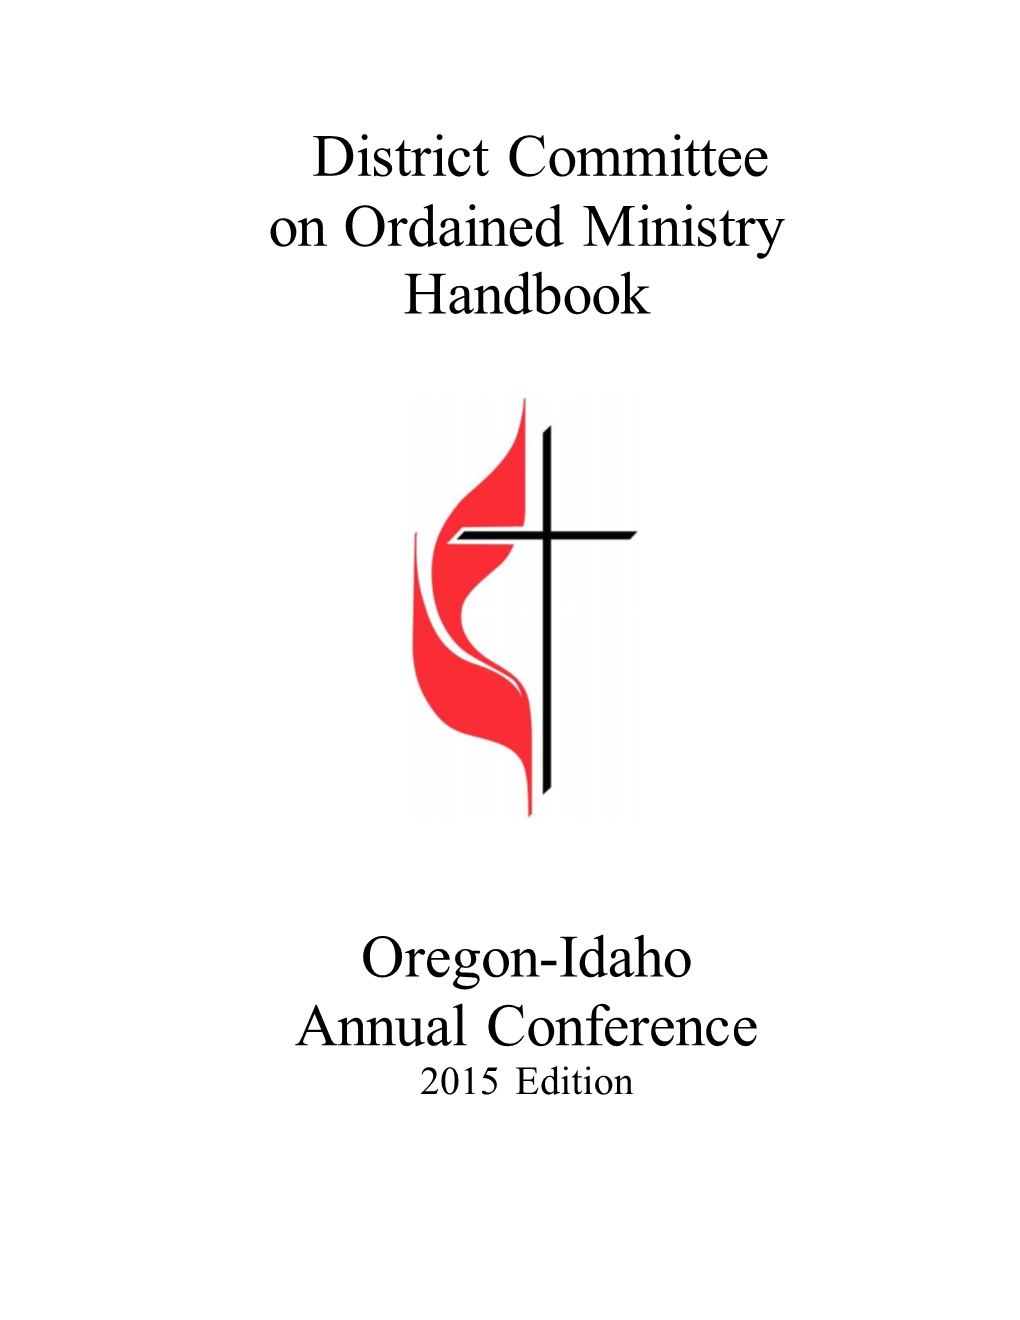 District Committee on Ordained Ministry Handbook Oregon-Idaho